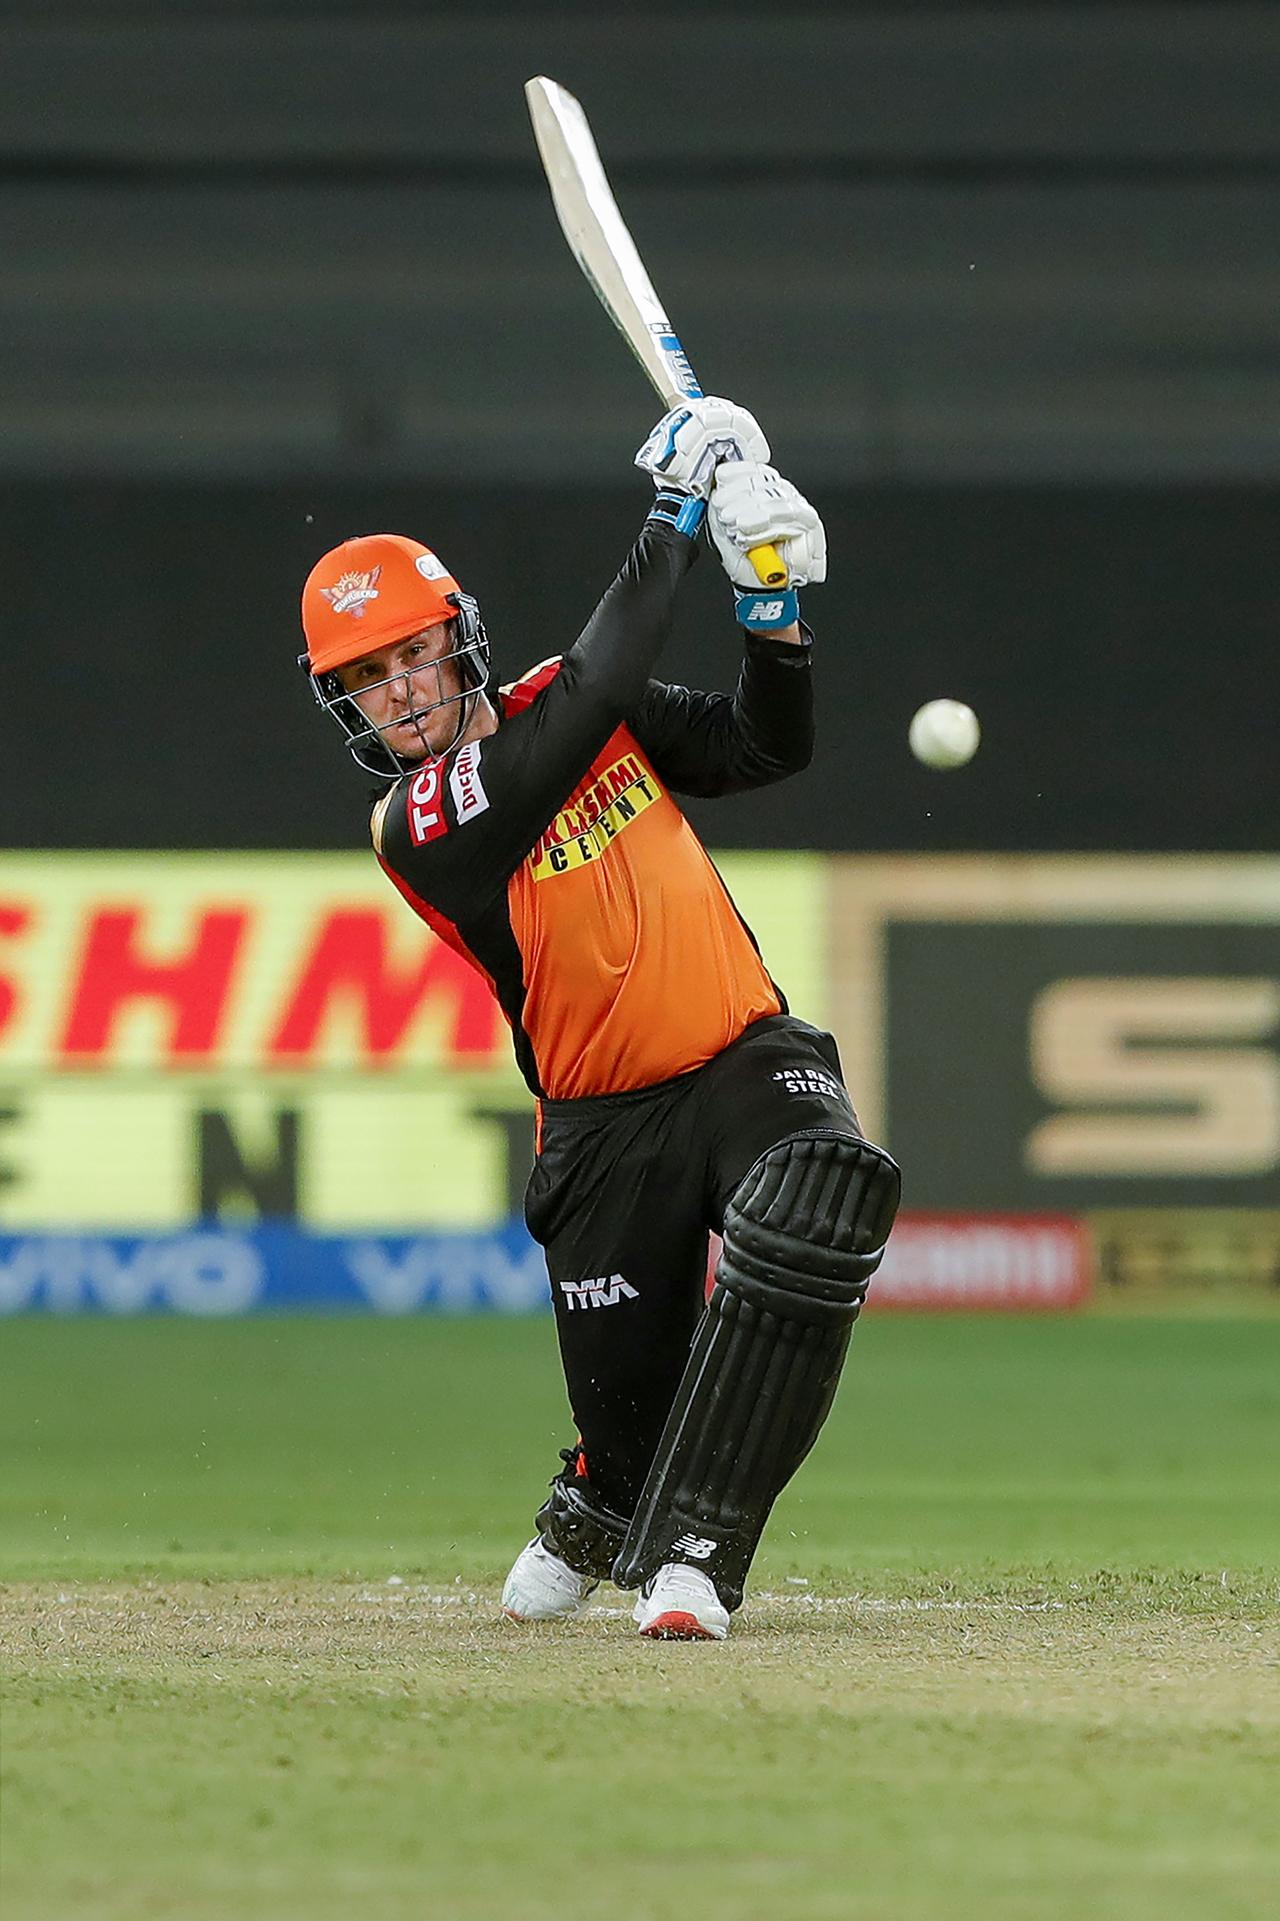 Sunrisers Hyderabad's Jason Roy stepped up against Rajasthan Royals after Sanju Samson's 82. Roy scored 60 off 42 to help SRH win the match by 7 wickets